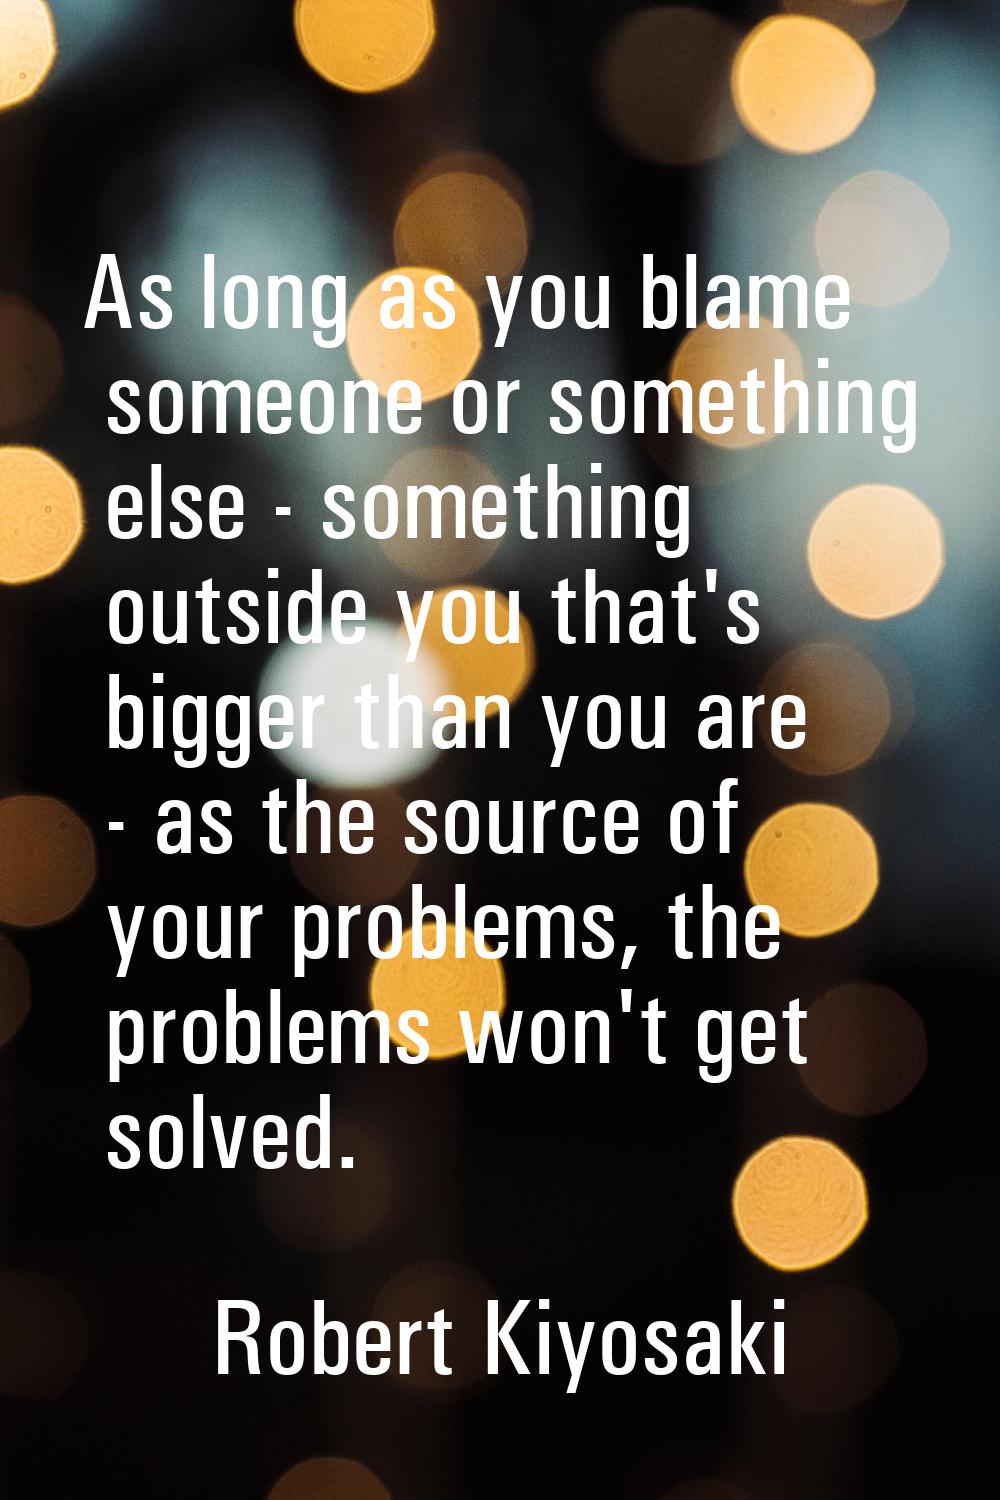 As long as you blame someone or something else - something outside you that's bigger than you are -